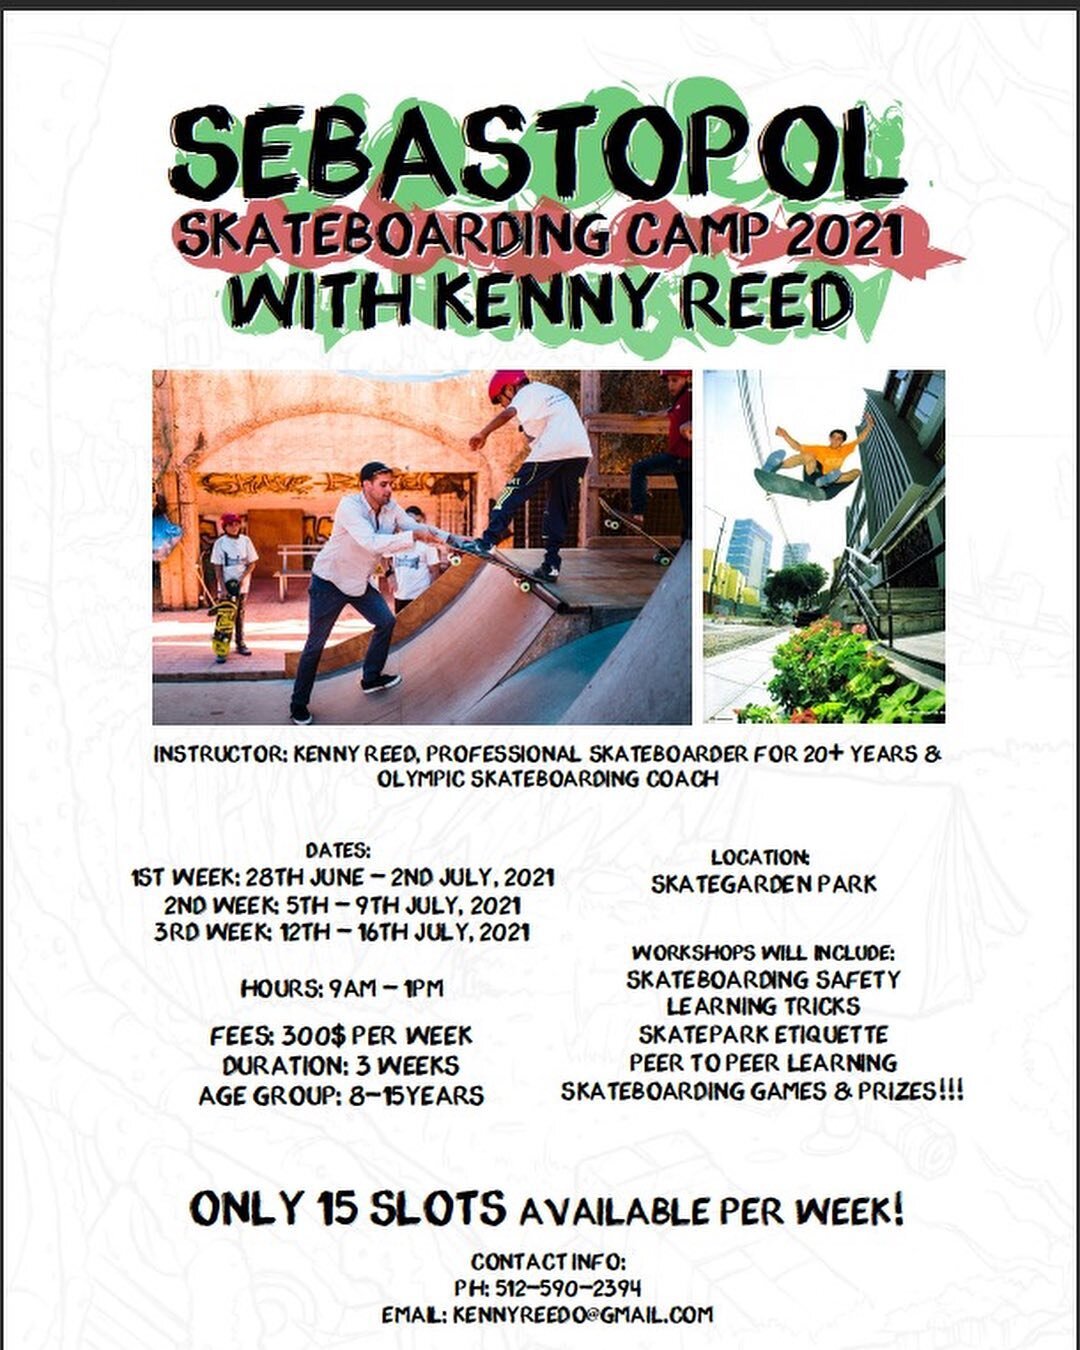 We just opened some spots in skate camp! Get &lsquo;em while they are hot at seb.org!